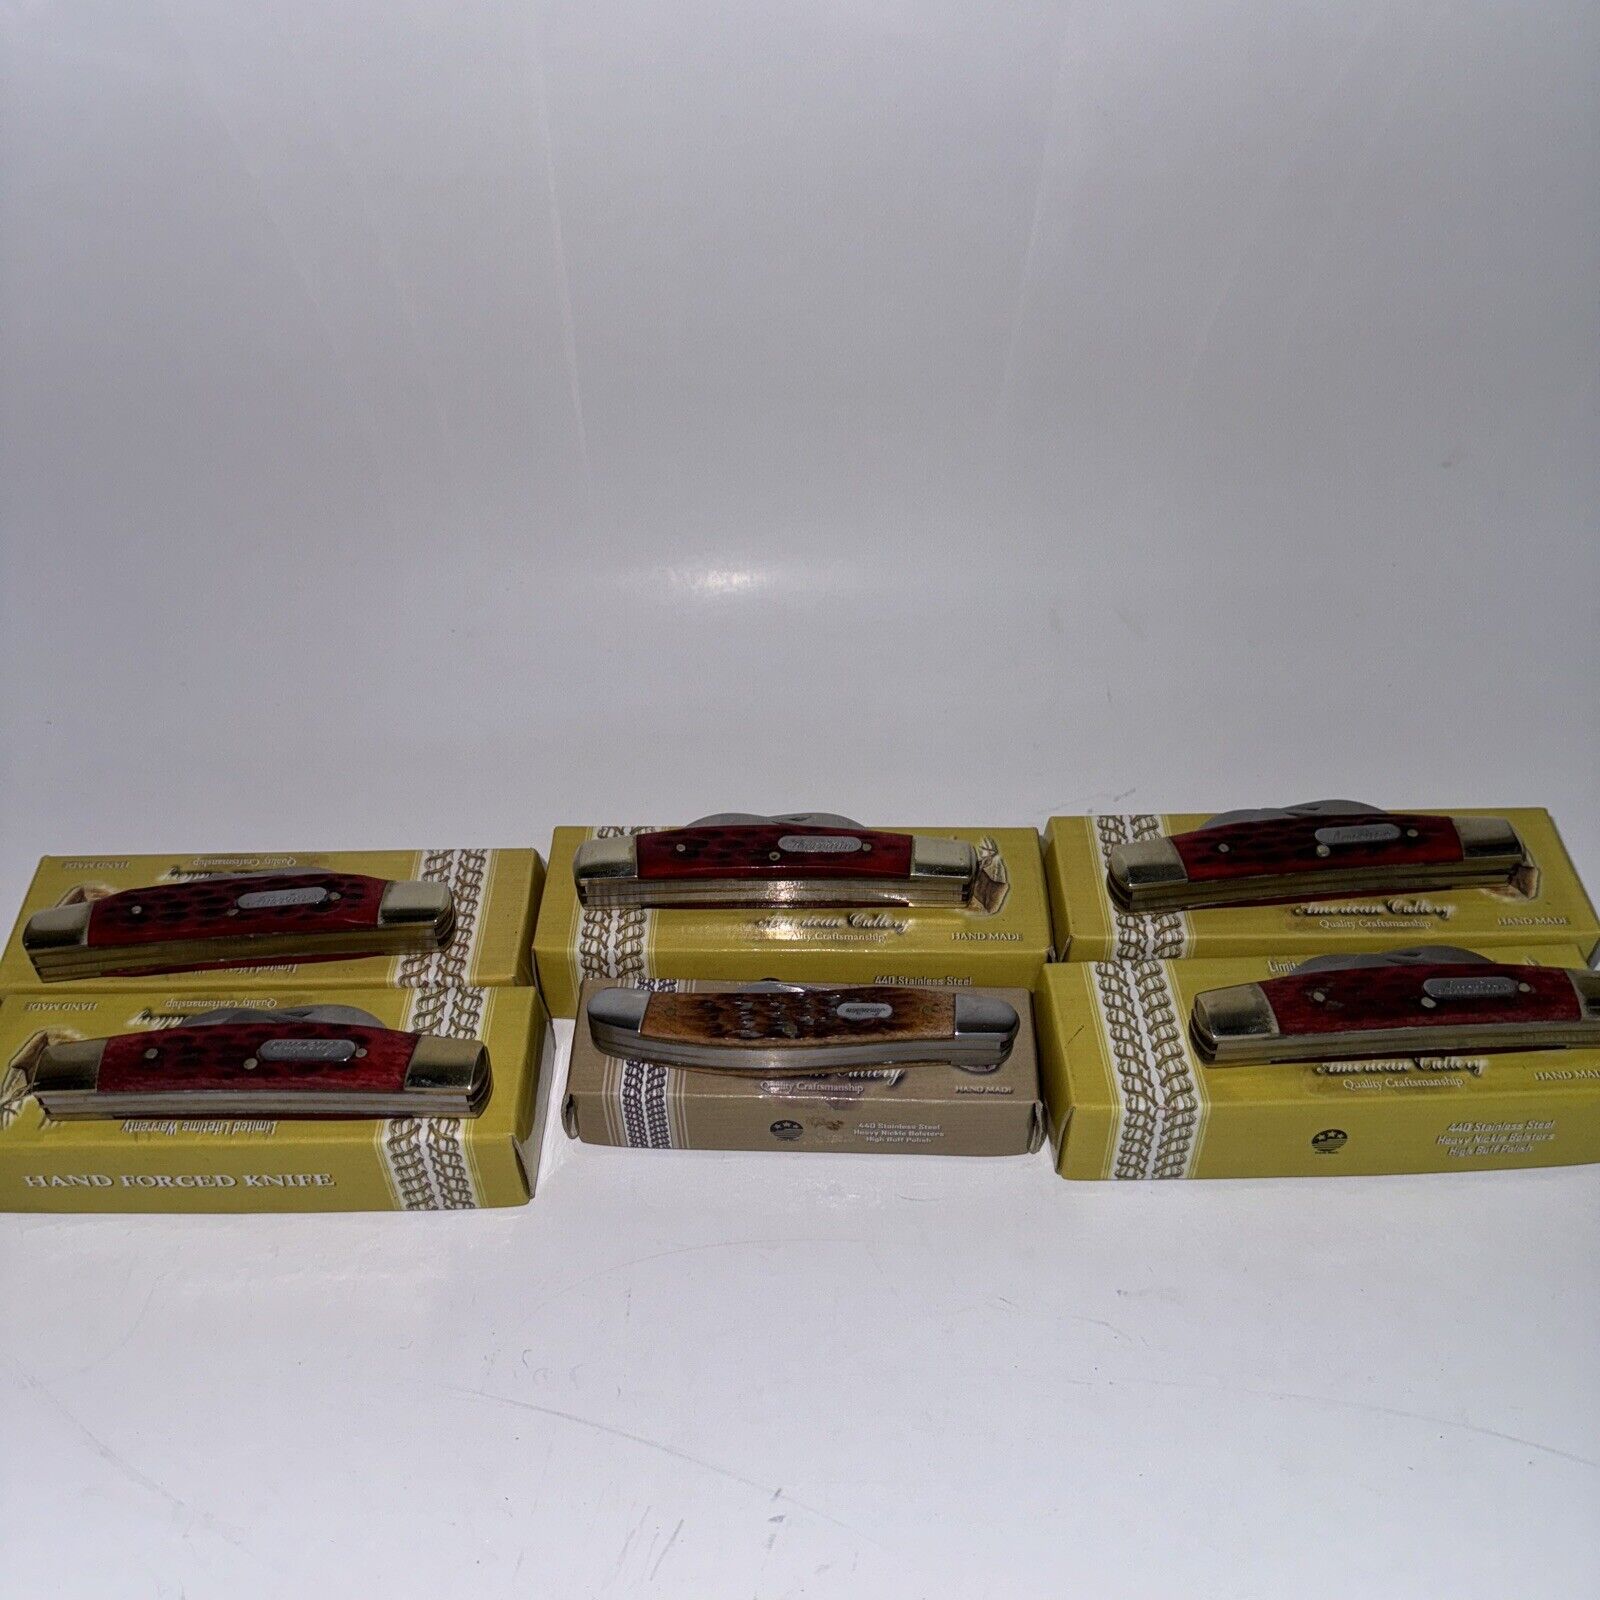 American Cutlery Pocketknife Lot of 6 Brand New In Box from Estate Sale